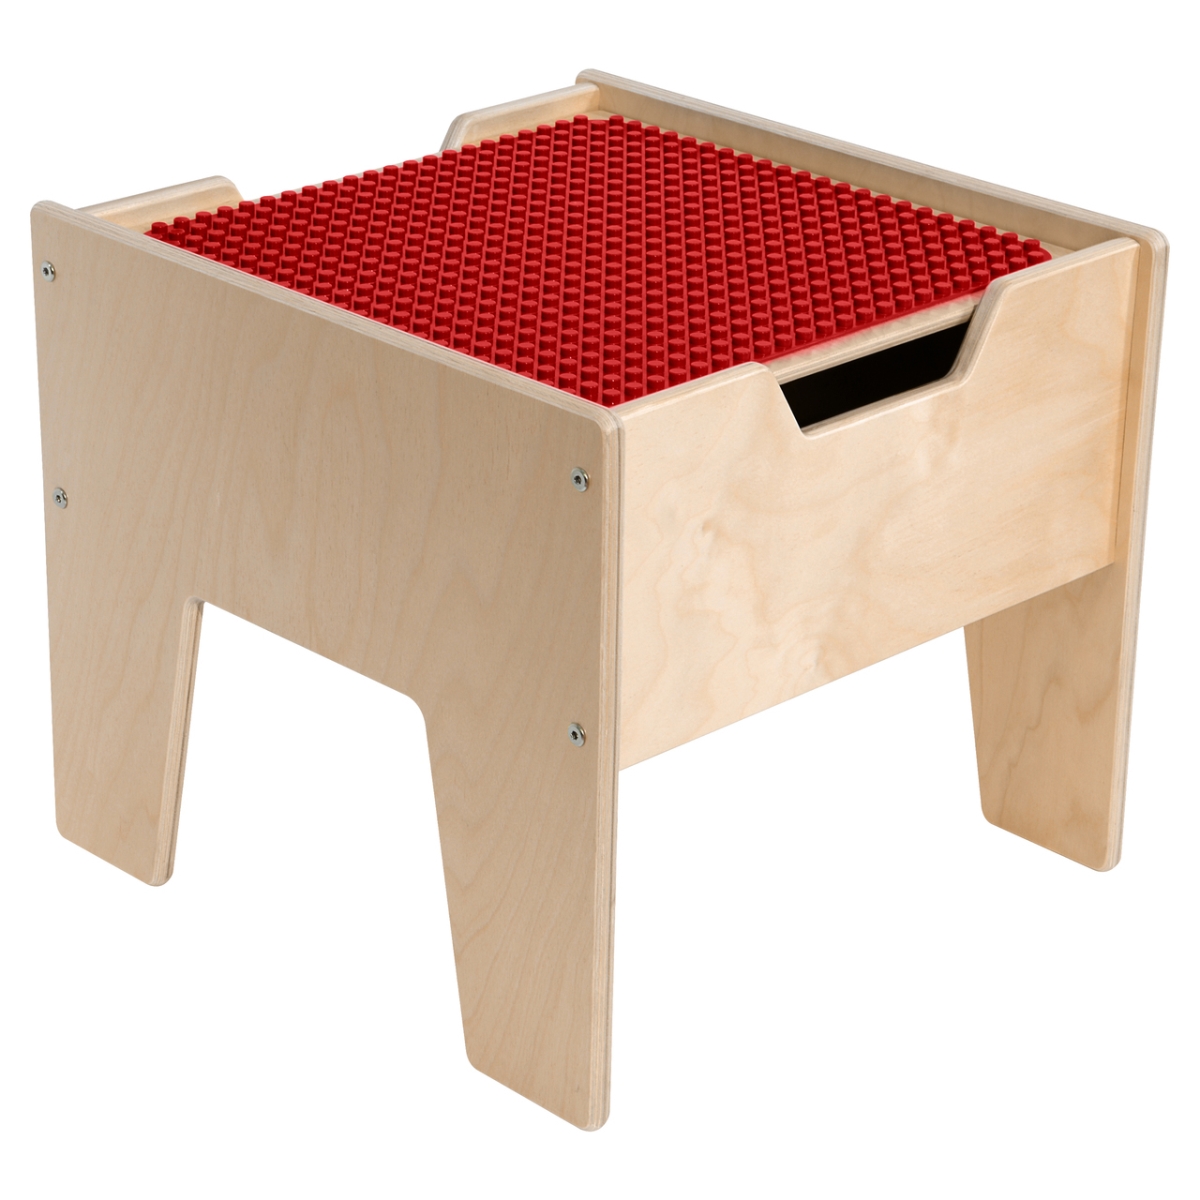 Picture of Contender C991300-PR 2-N-1 Activity Table with Red DUPLO Compatible Top - RTA